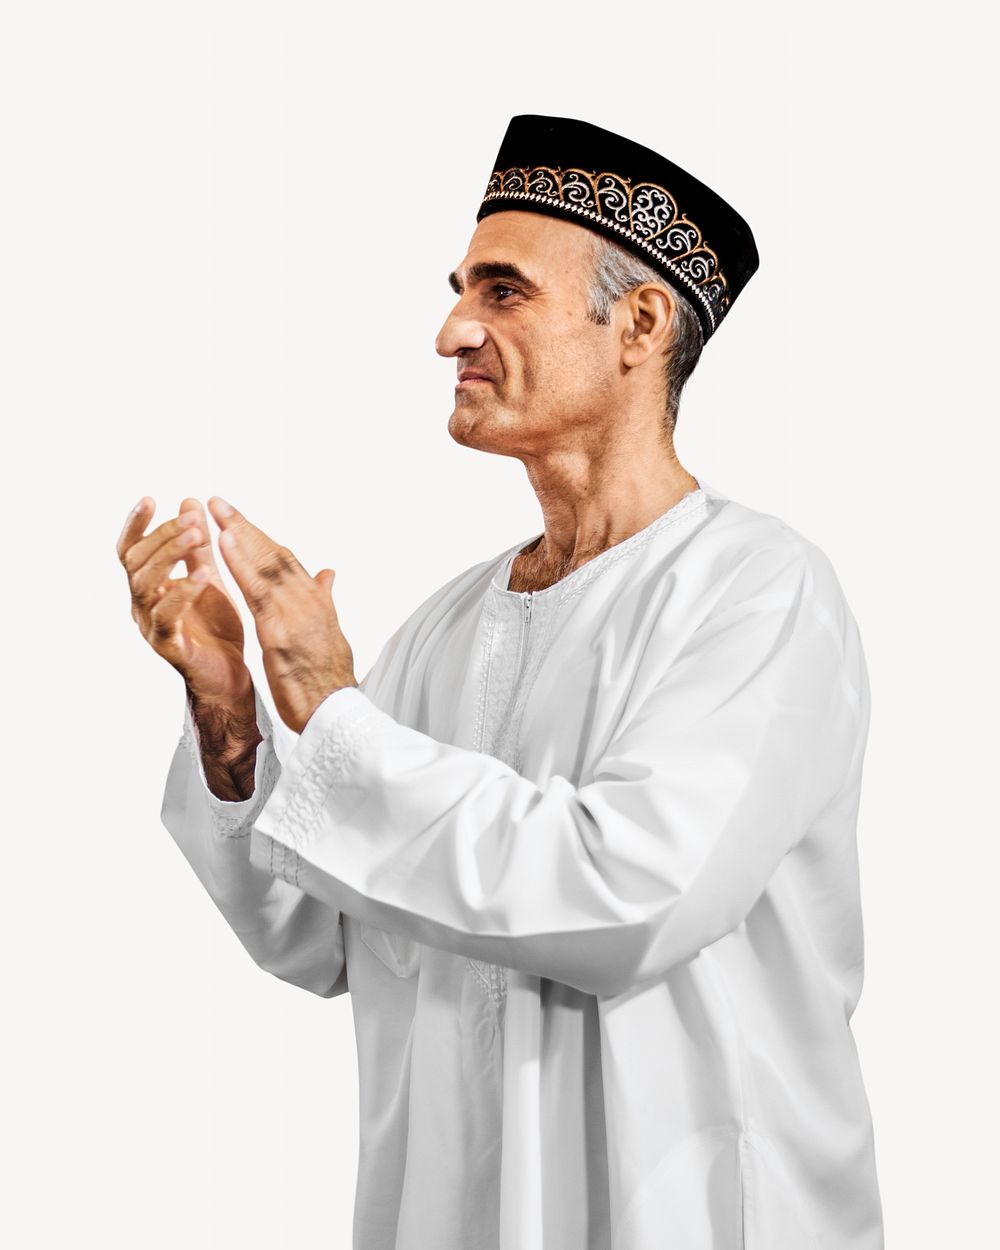 Arabic man in white clapping